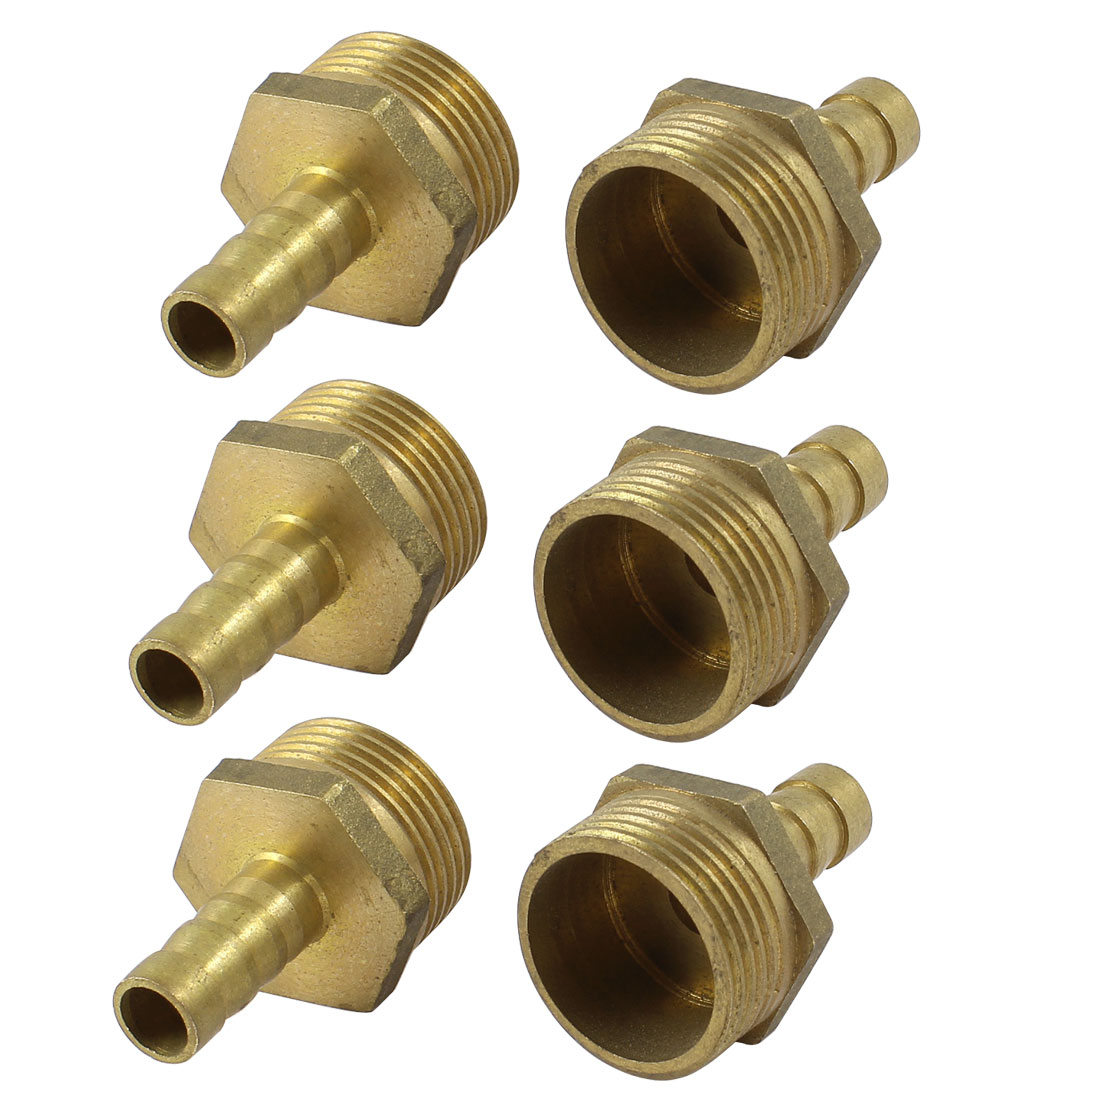 Unique Bargains 6 Pcs 3/4 PT Male Thread to 10mm Hose Barb Air Gas Pipe Quick Coupler Adapter